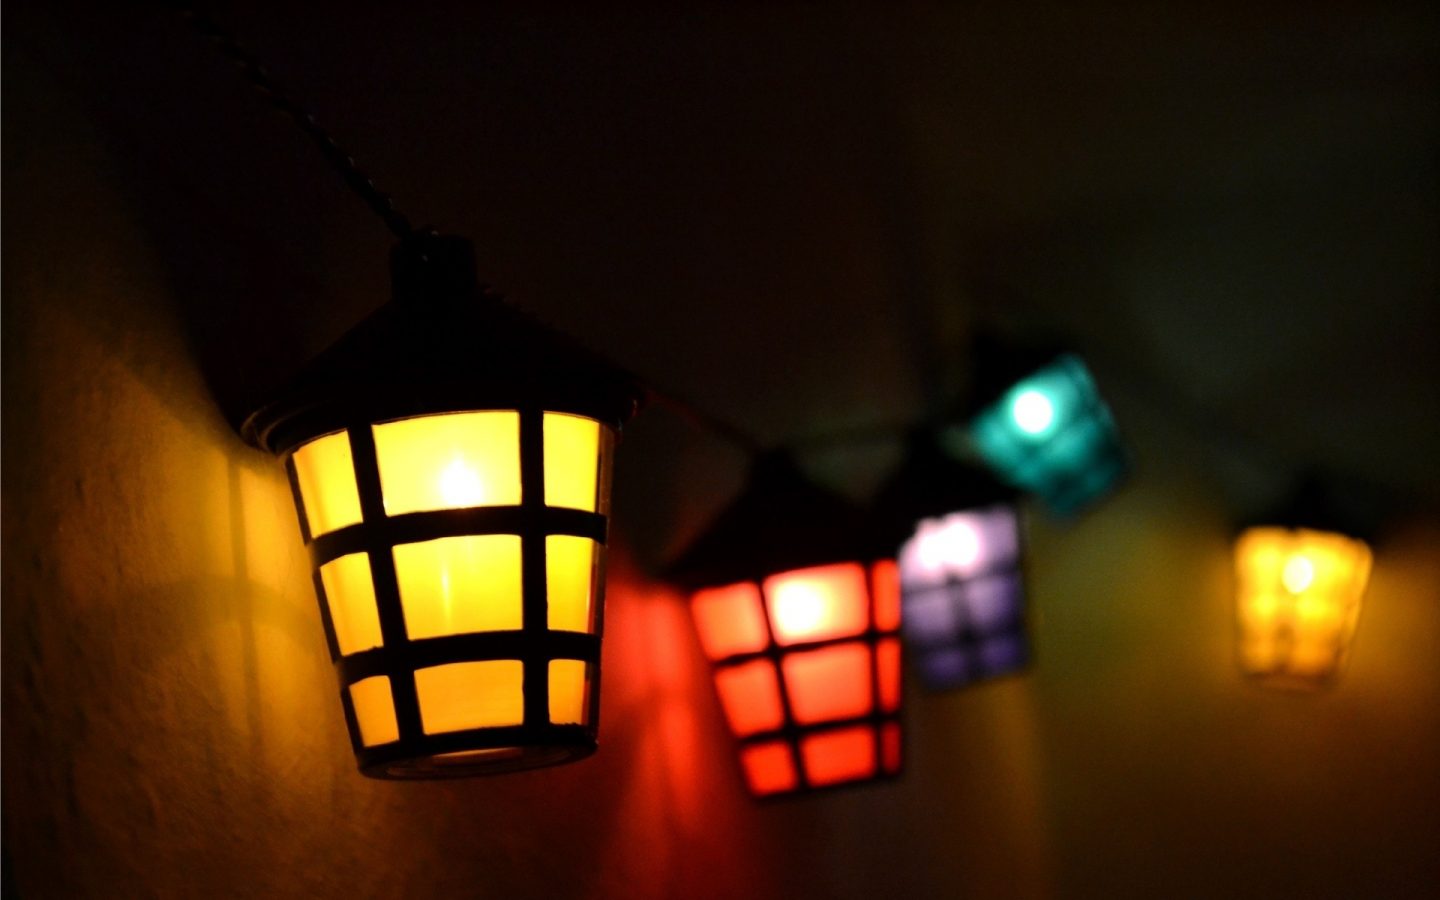 lights, colors, red, blue, purple, yellow, lamp